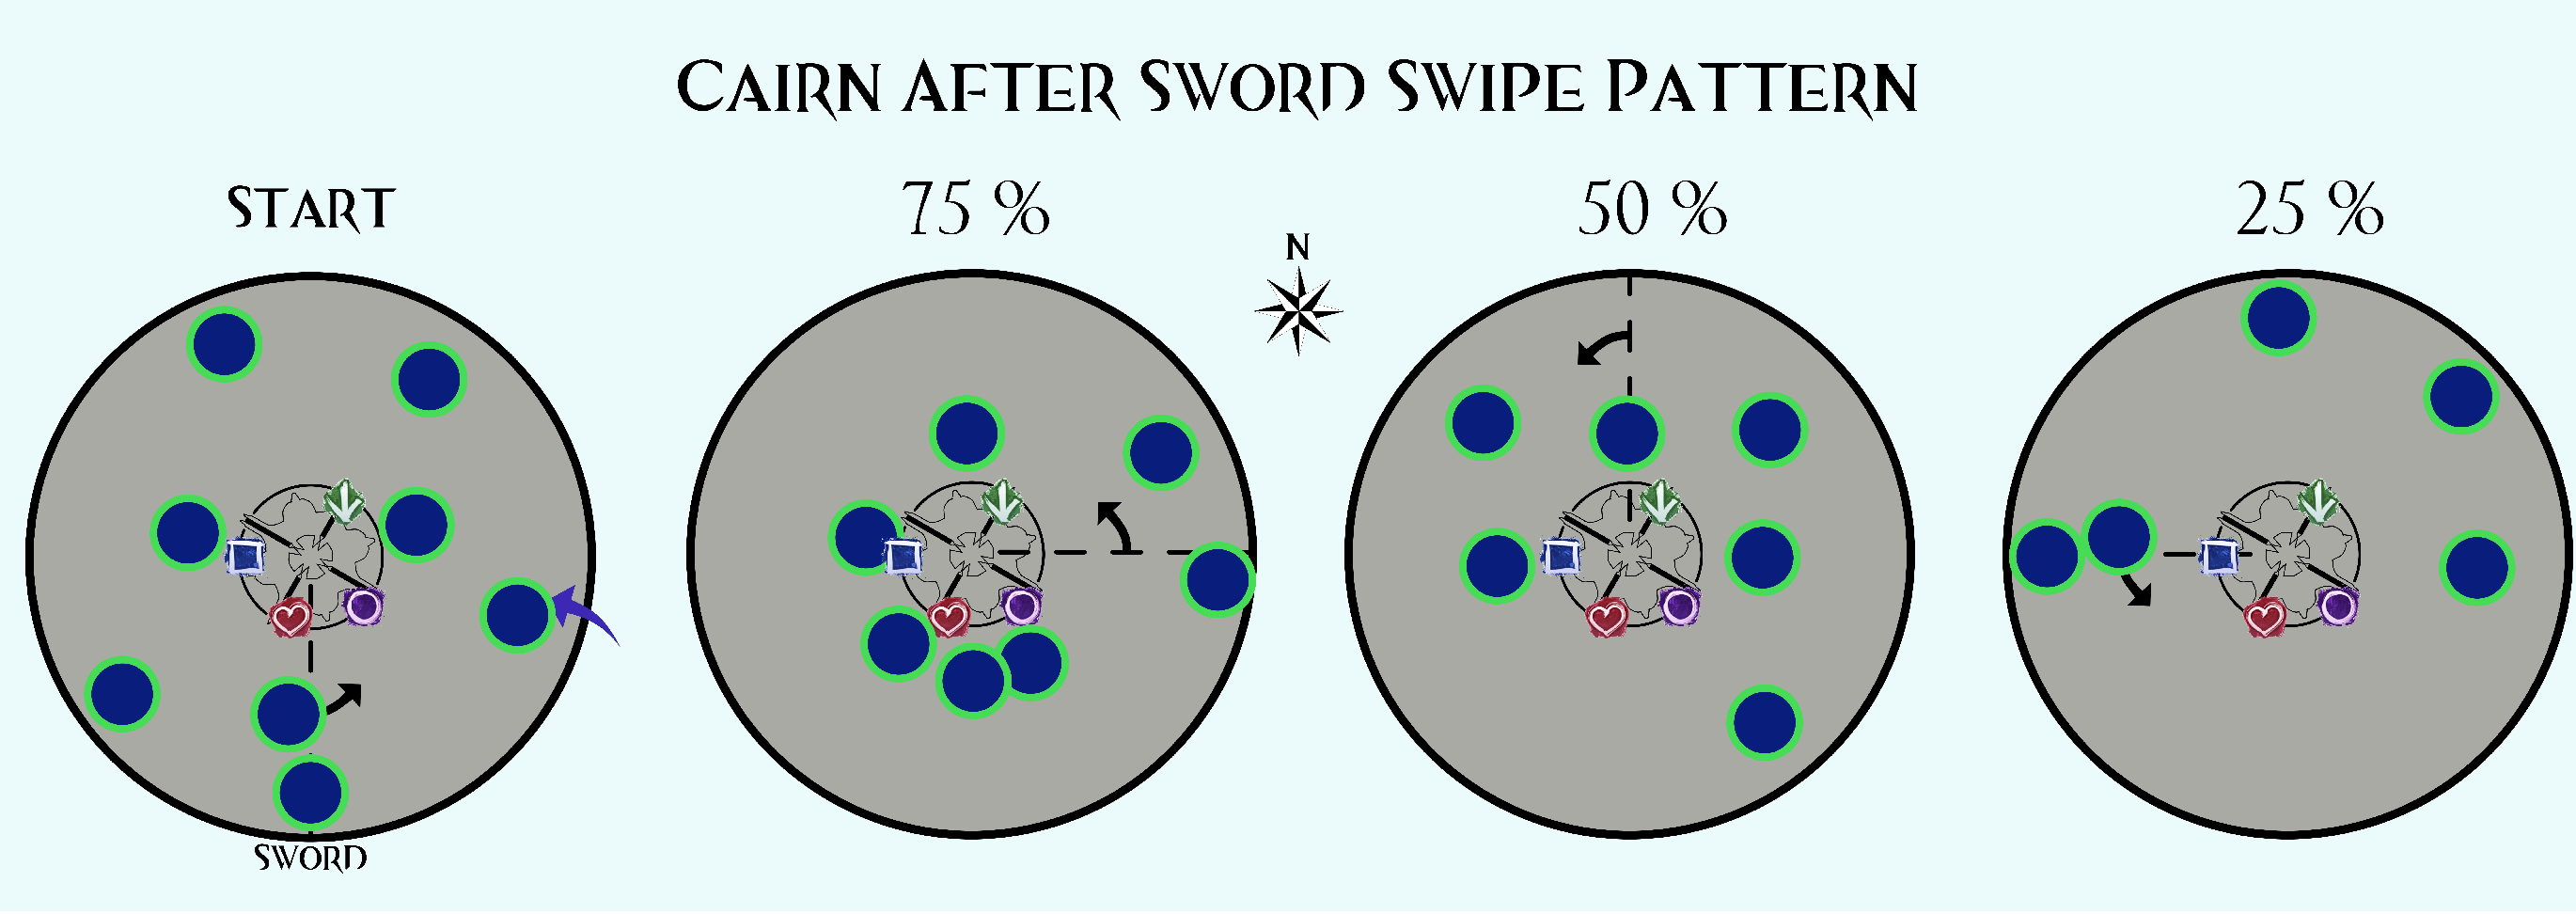 Cairn Sword Pattern.png